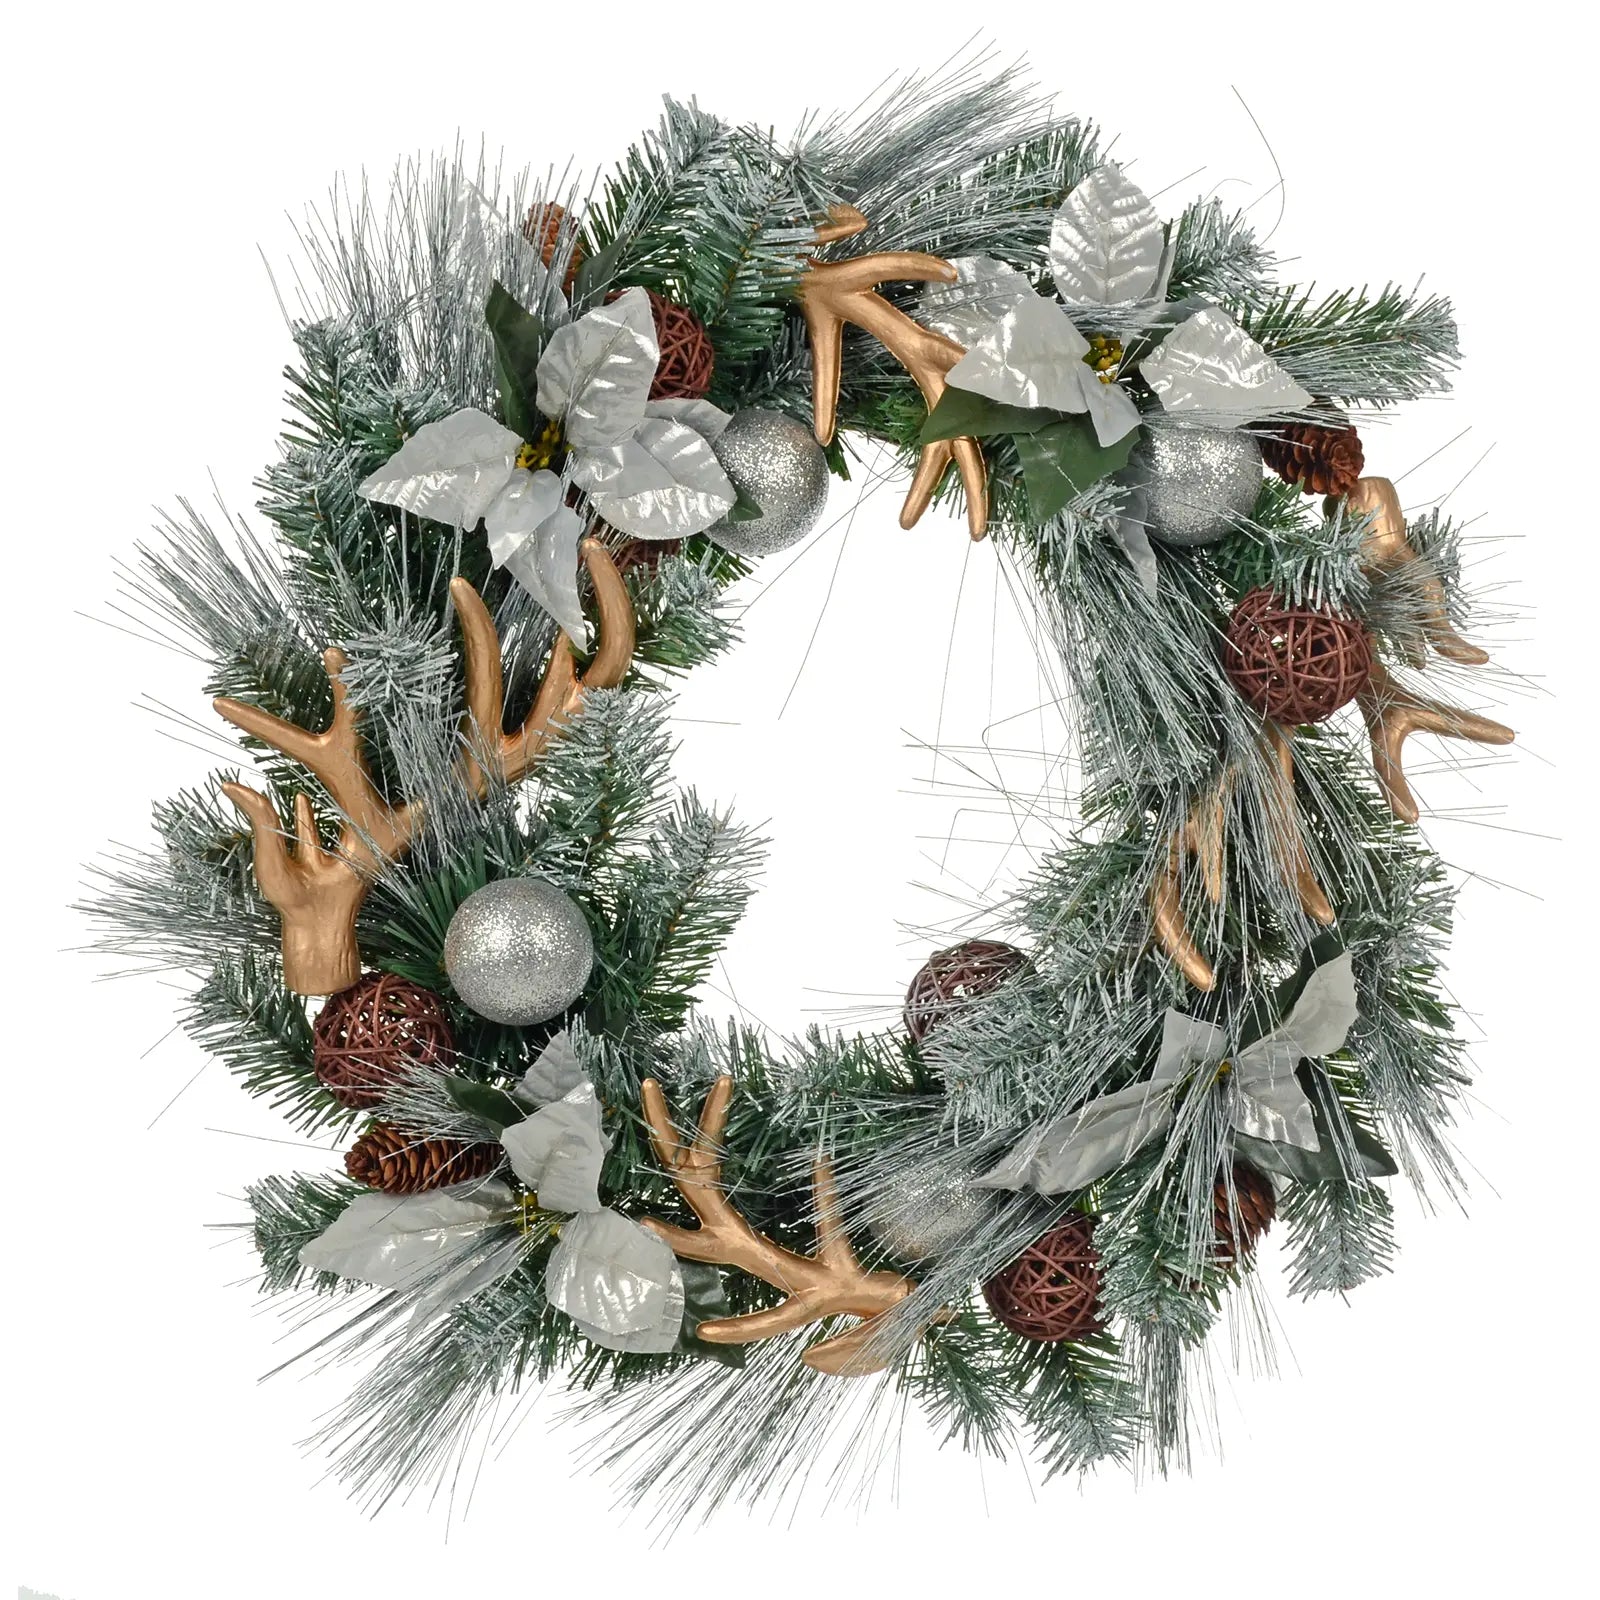 60cm green and silver christmas wreath decorated with rattan balls, pine cones, green and silver foliage and gold reindeer antlers